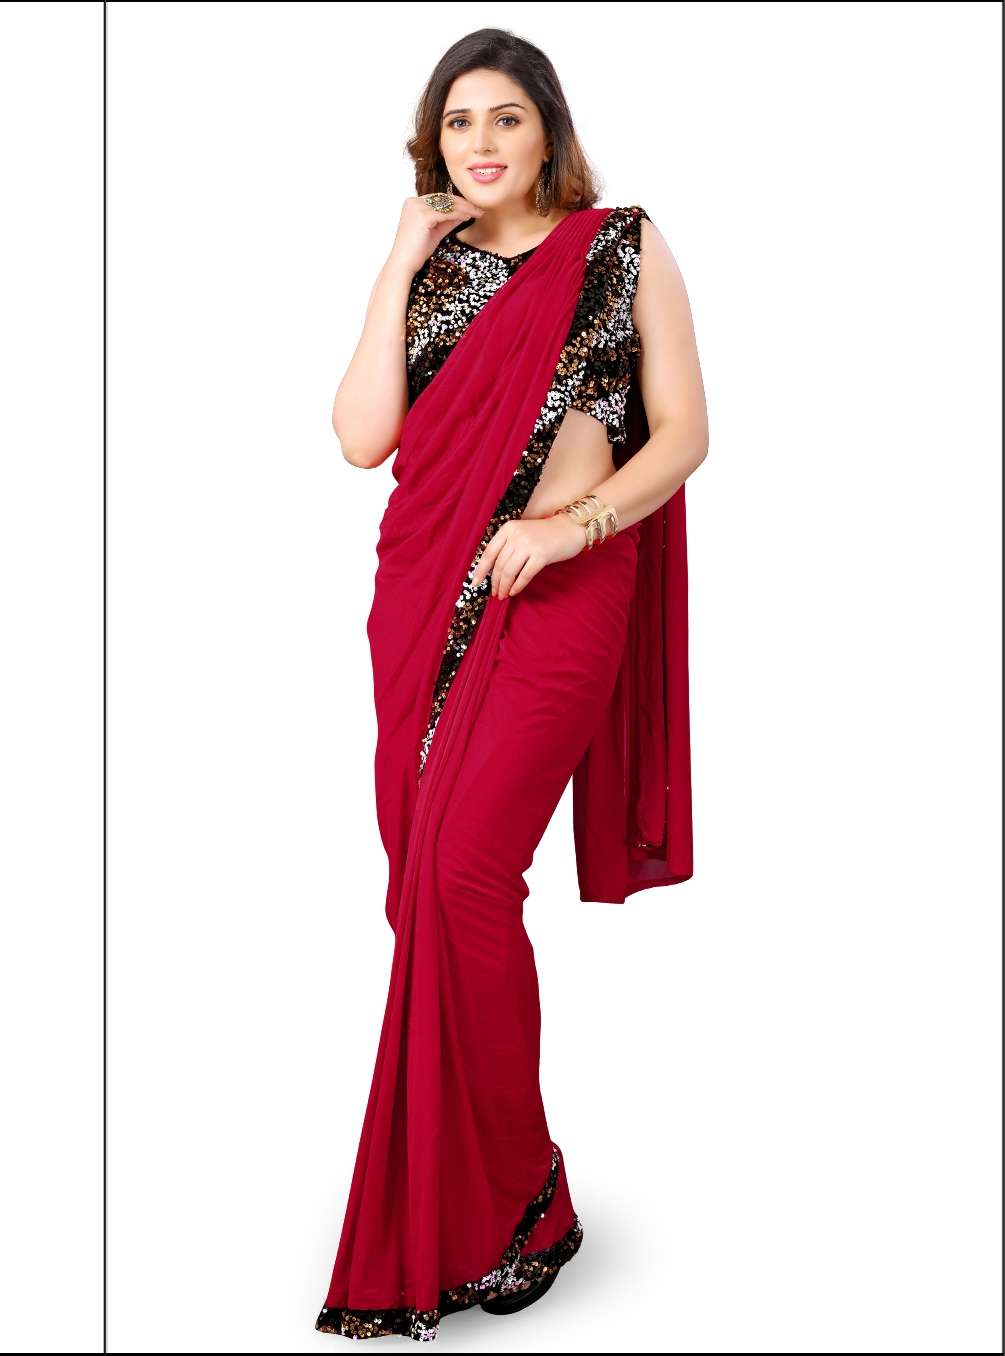 1 Minut Ready To Wear Saree online At Best Rate